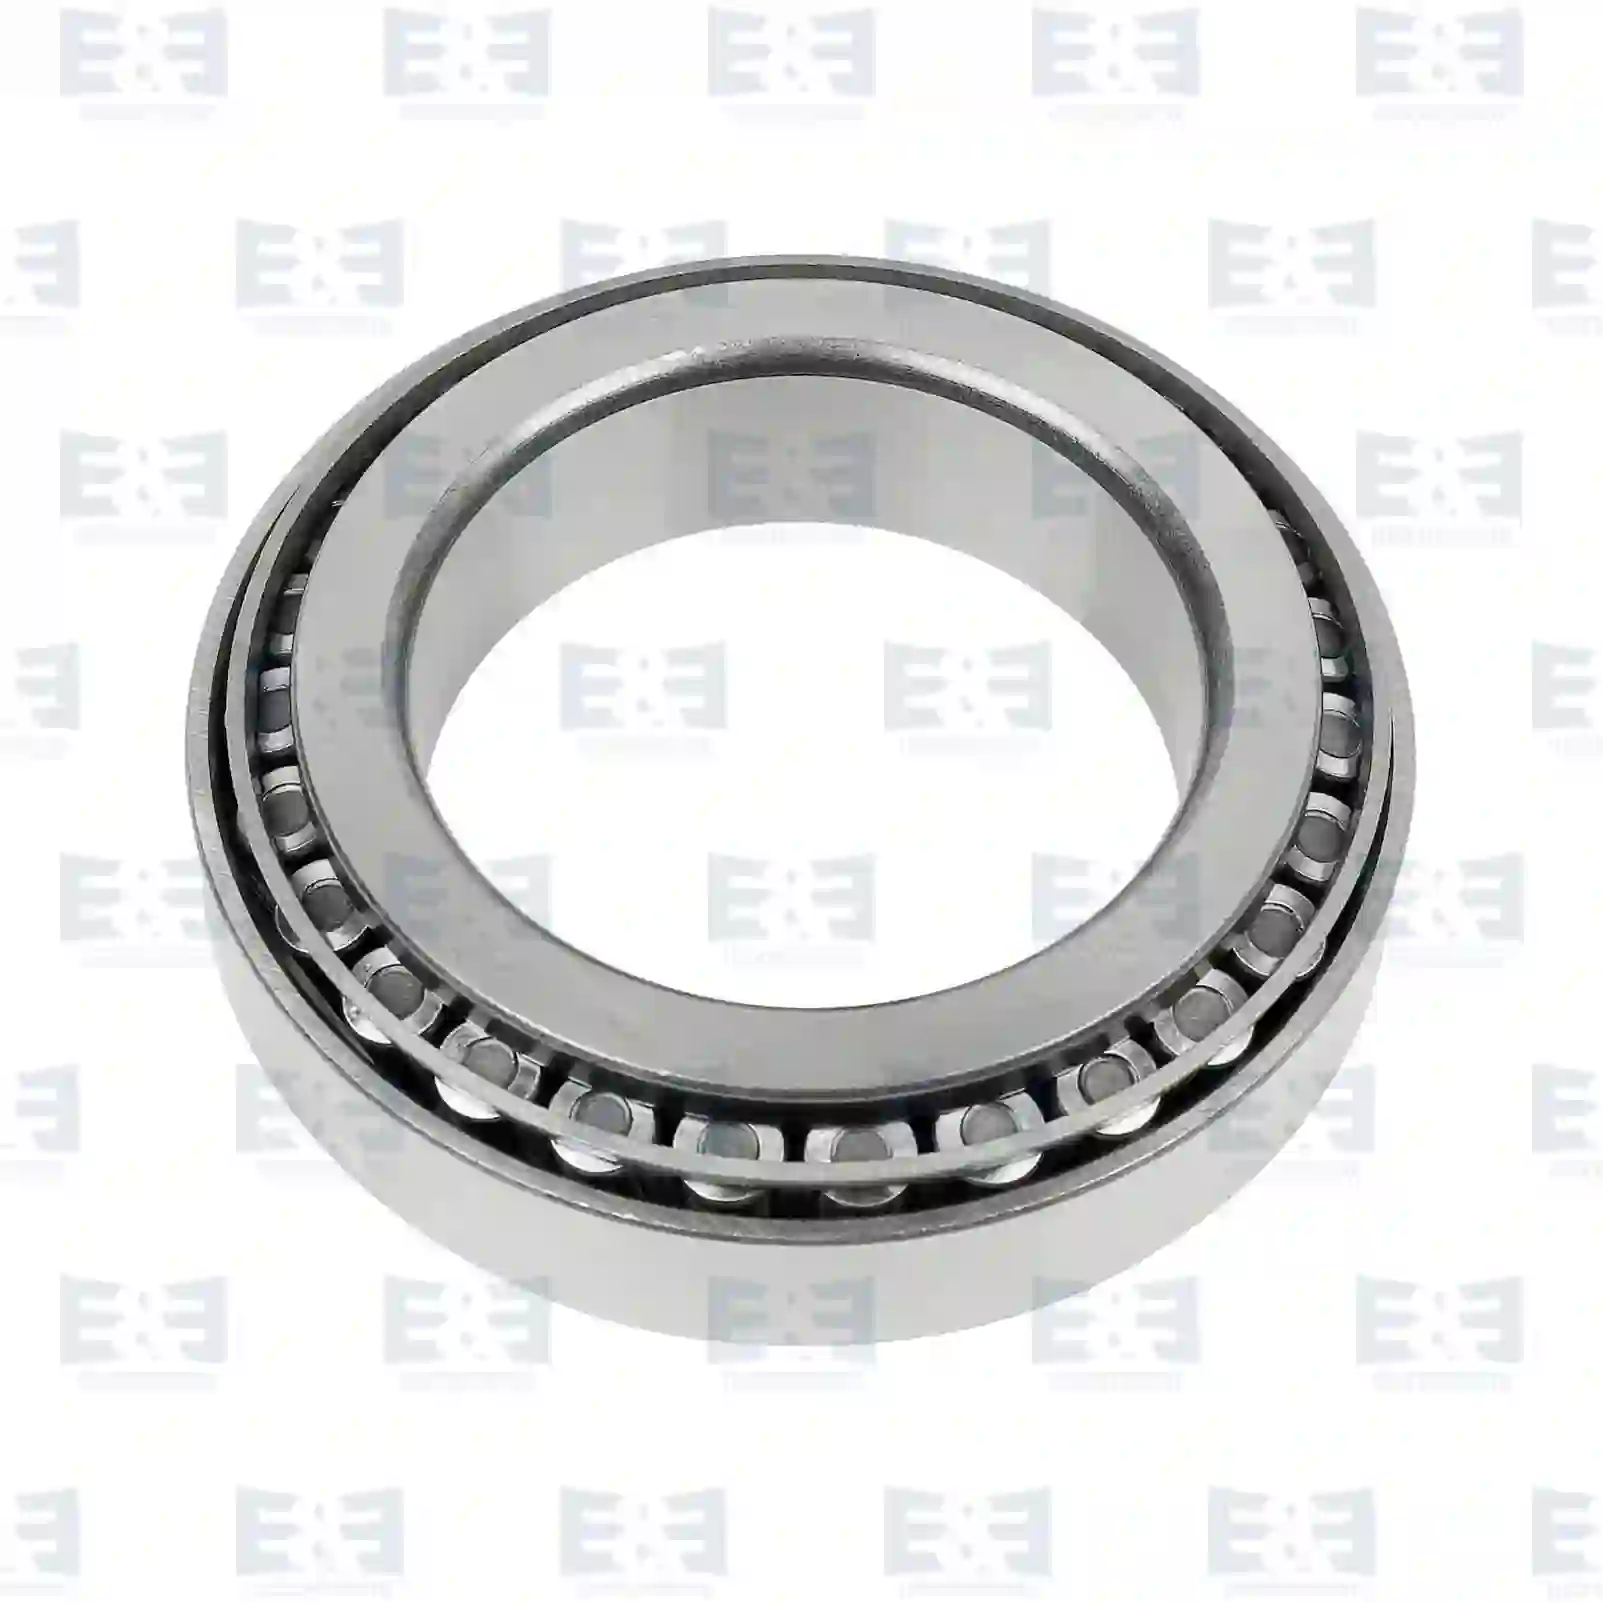 Bearings Tapered roller bearing, EE No 2E2286210 ,  oem no:000237117, 07164410, 01905216, 07164410, 07172769, 3612906900, 60187186, 7164410, 3007445X1, 06324890128, 000720032014, 0059816605, 0059816805, 0059819505, 0059819805, 0069816805, 0179817205, 0179818005, 38440-21X00, 0023336034, 5000287980, 969300701, 184621, 969300701, ZG03015-0008 E&E Truck Spare Parts | Truck Spare Parts, Auotomotive Spare Parts